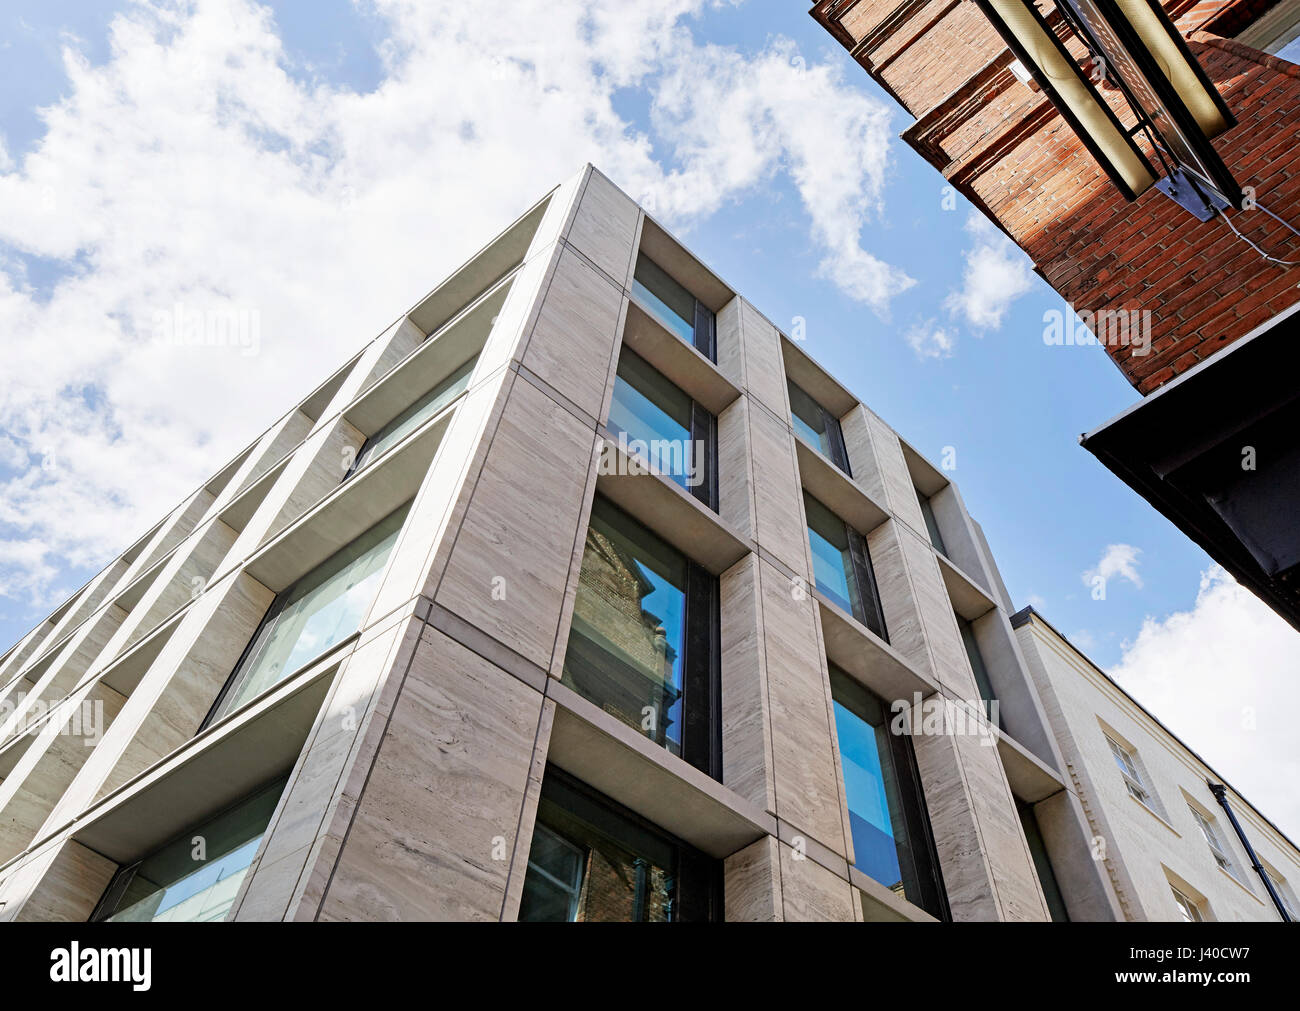 Exterior facades viewed from below. Chancery Lane, London, United Kingdom. Architect: Bennetts Associates Architects, 2015. Stock Photo